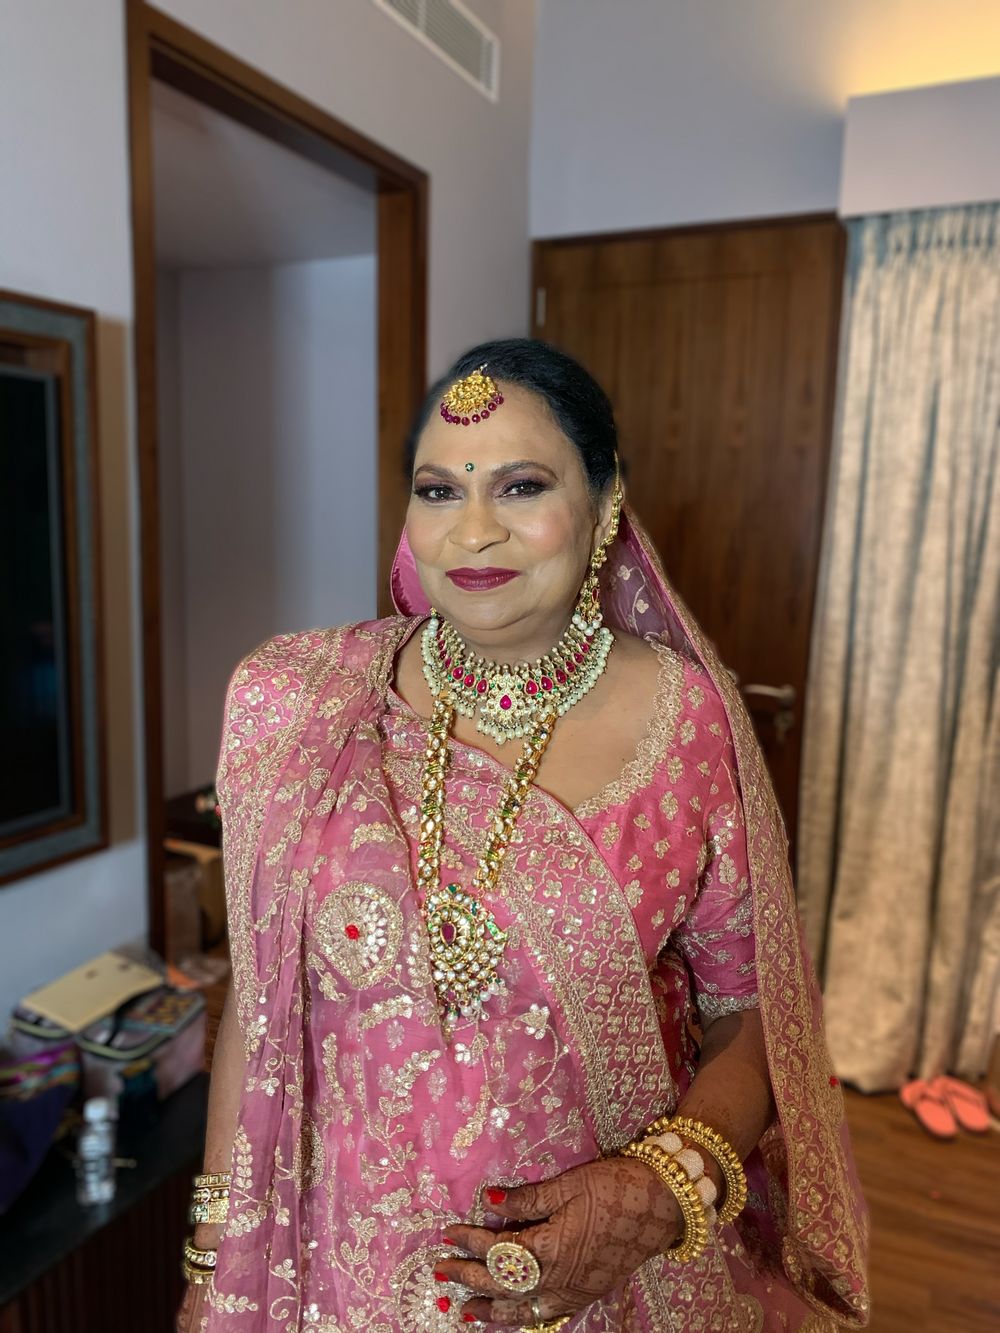 Photo From Mothers of Groom & Bride - By Tanvi KG Makeup